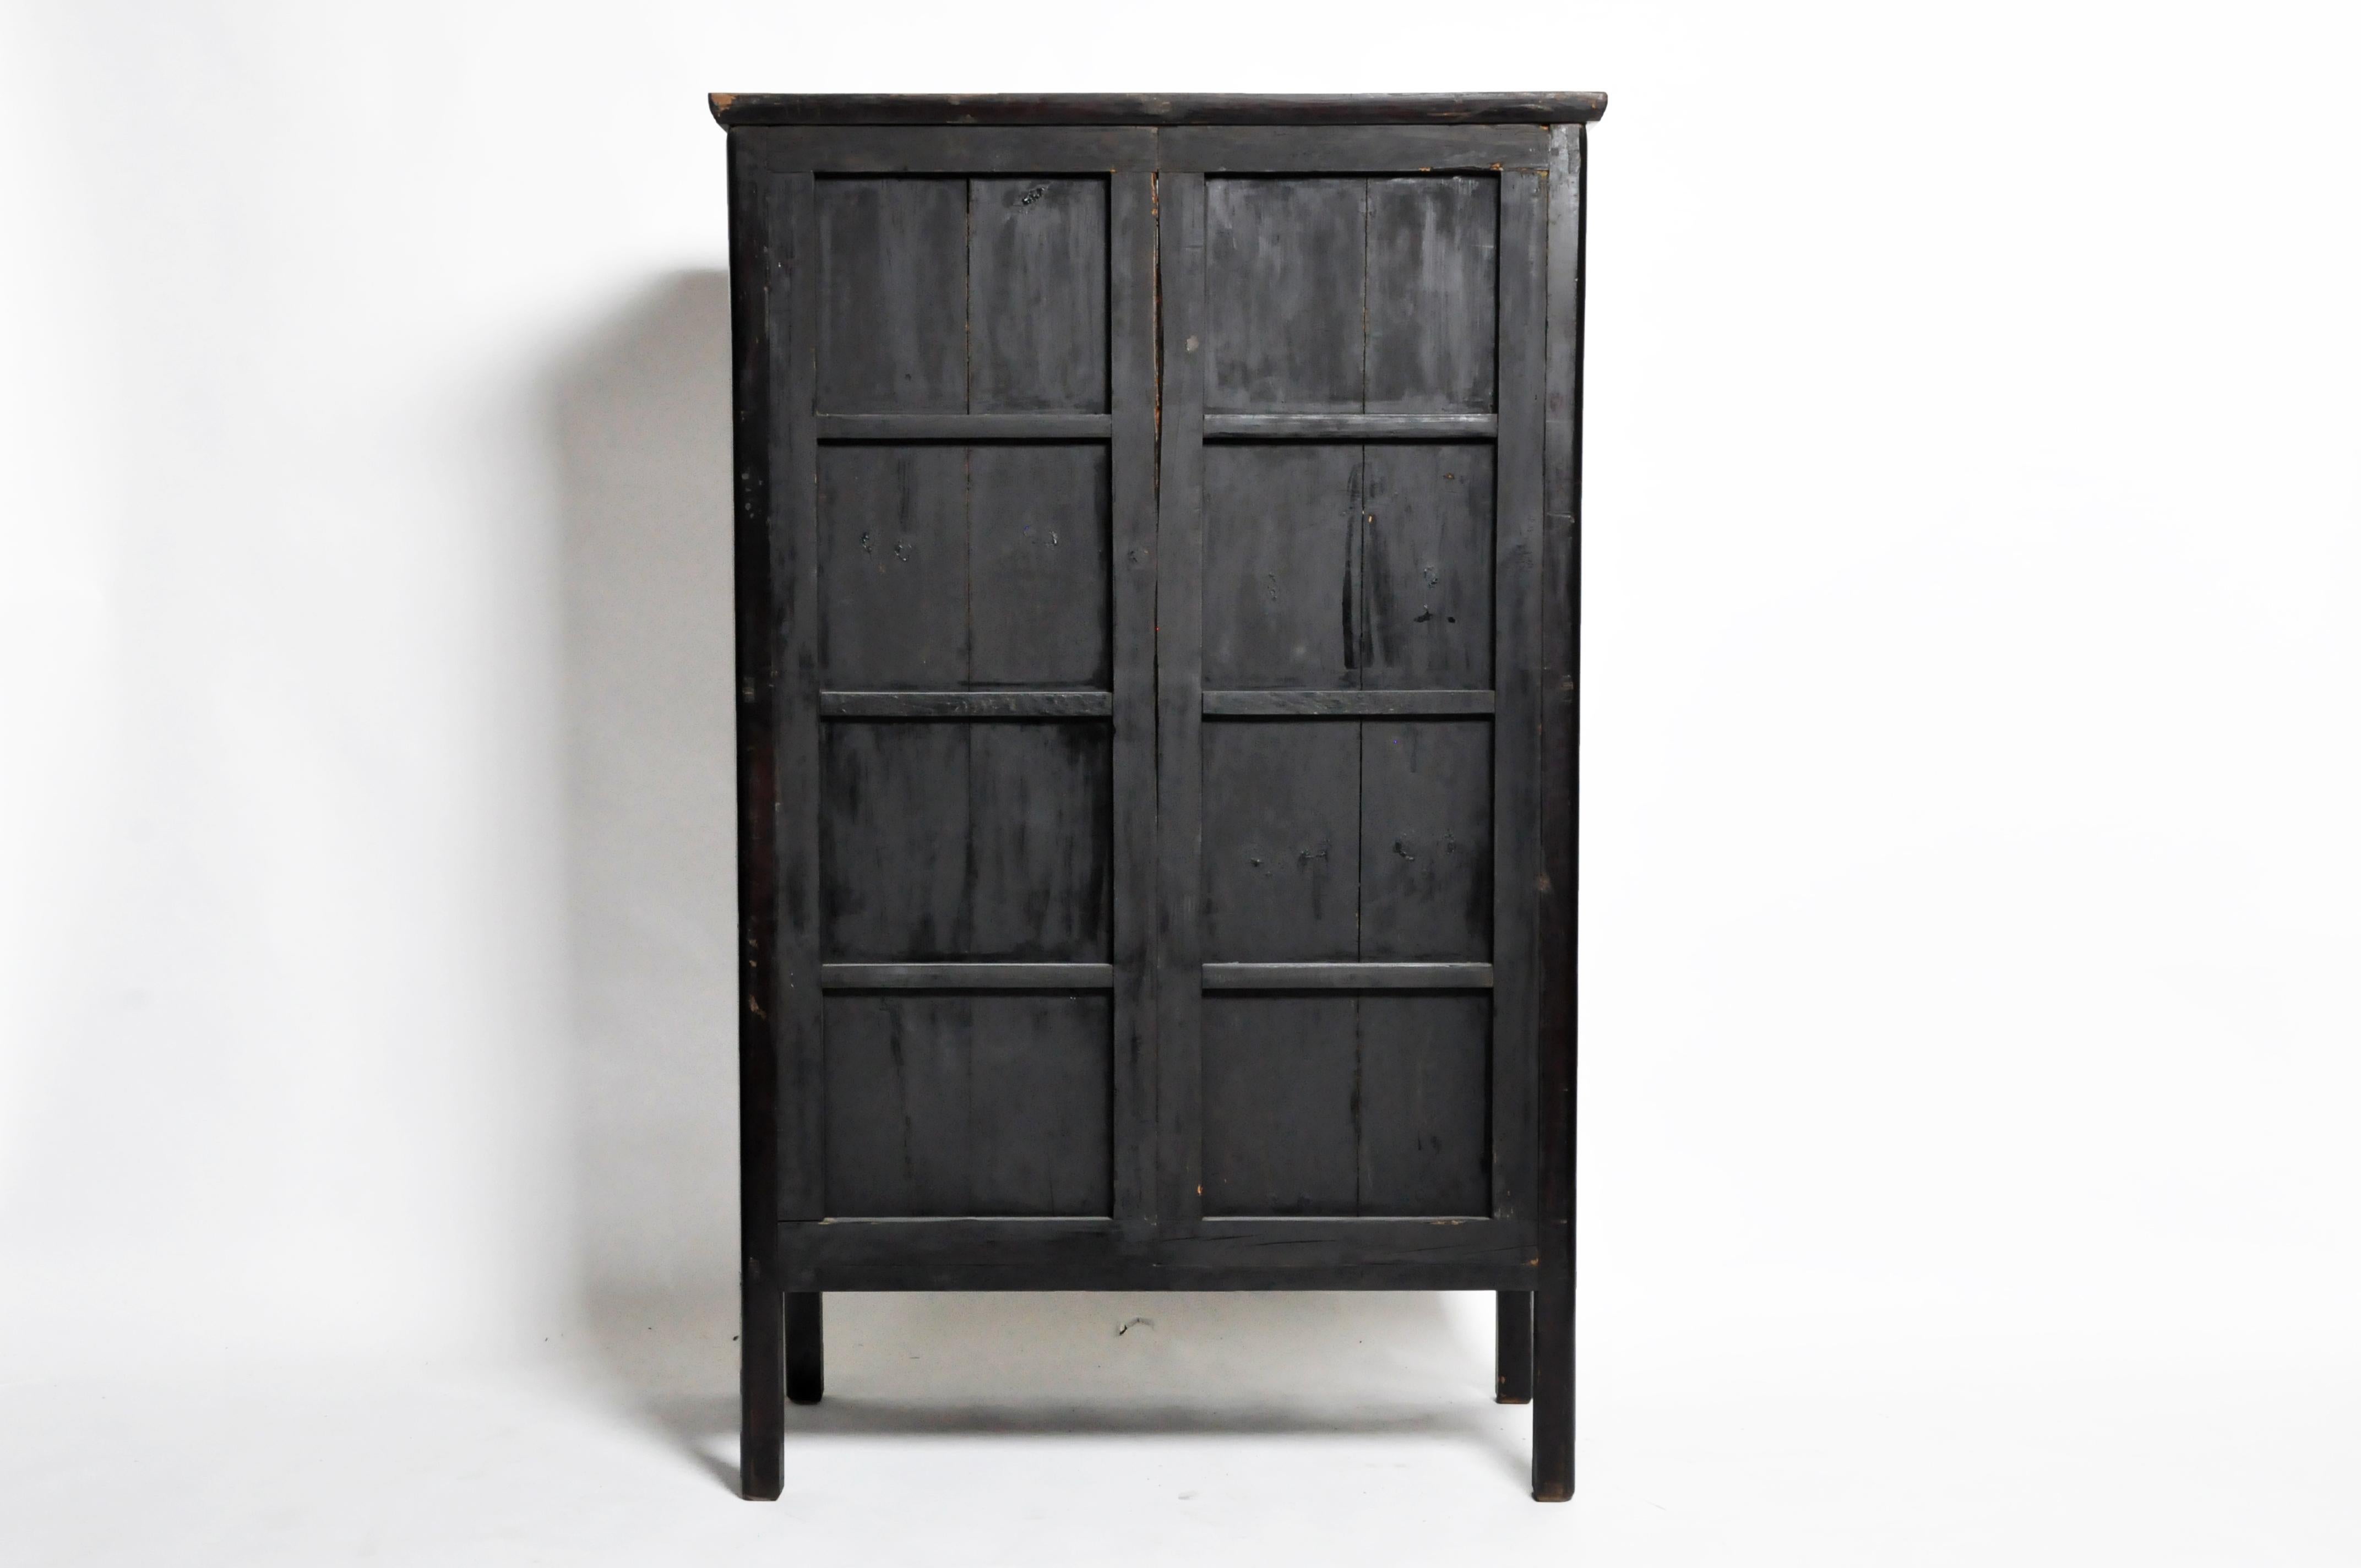 This cabinet is from Zhenjiang, China and was made from wood and black lacquer, circa early 19th century. This piece features a pair of bi-fold doors, 2 shelves, 4 drawers, and a hidden storage compartment for additional storage. The piece has been